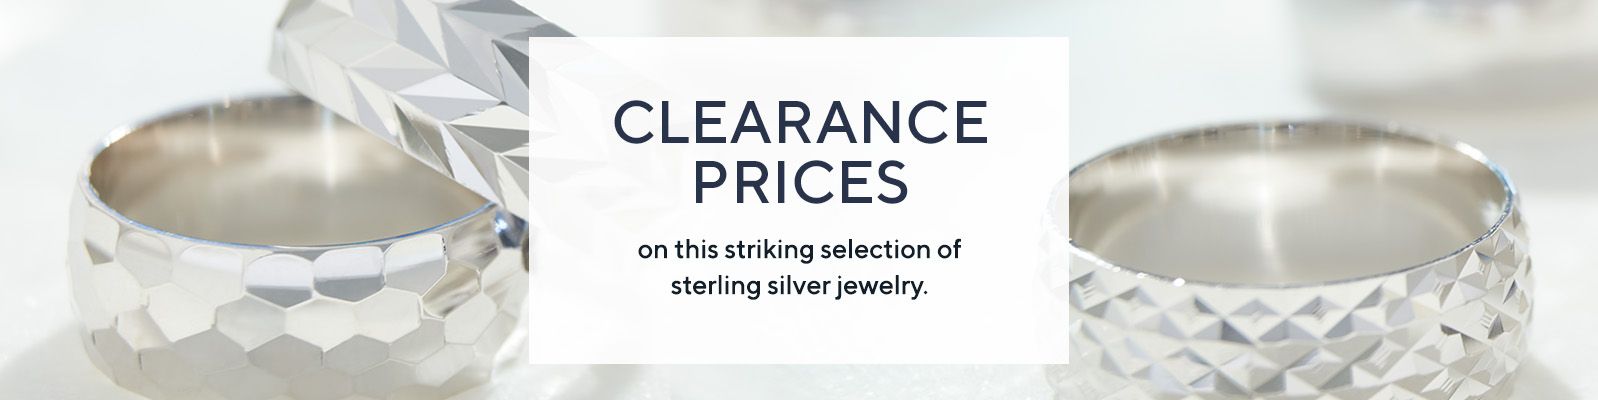 Clearance Prices on this striking selection of sterling silver jewelry. 